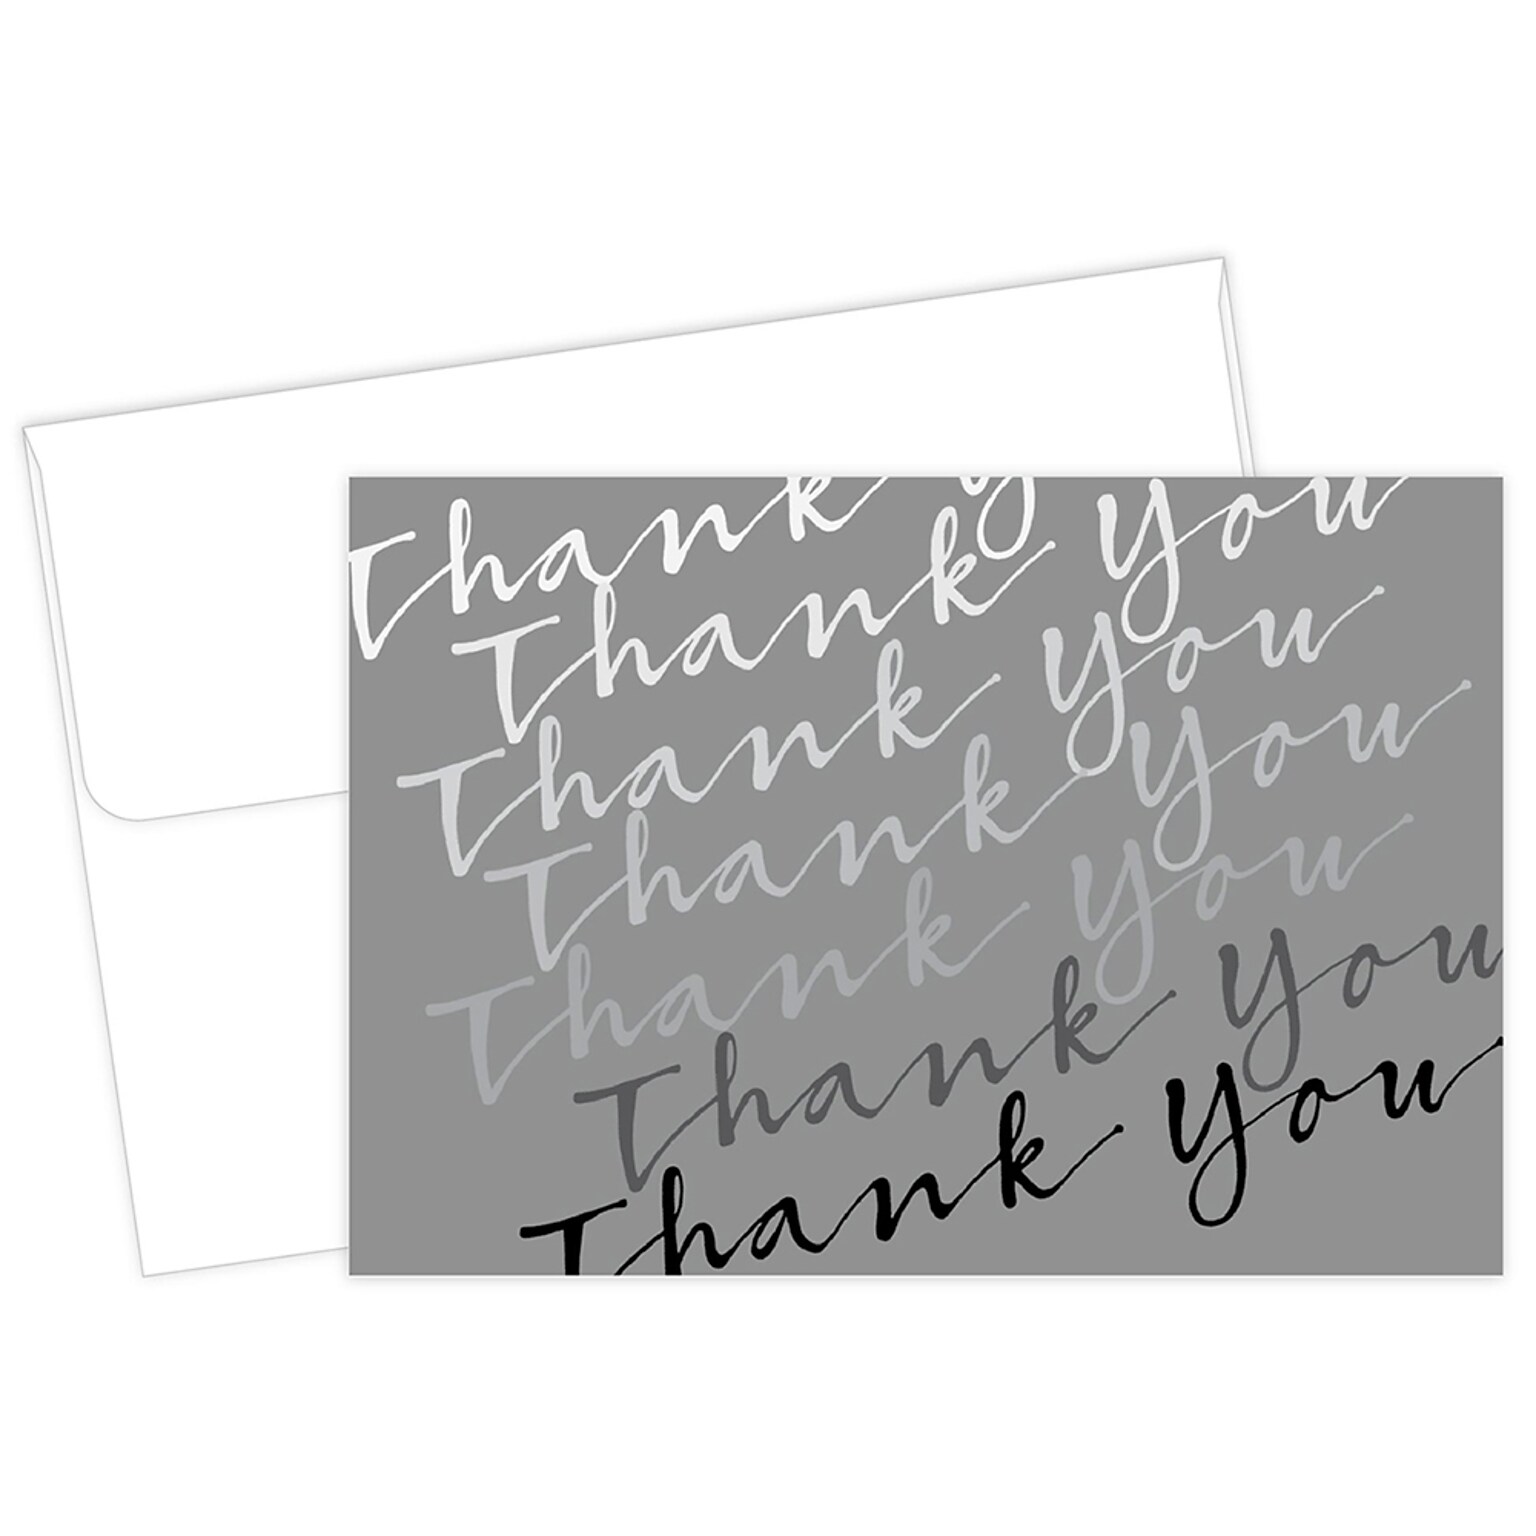 Masterpiece Studios Great Papers!® Cursive with Metallic Silver  Thank You Note Card, 4.875H x 3.35W, 50 count (2017053)